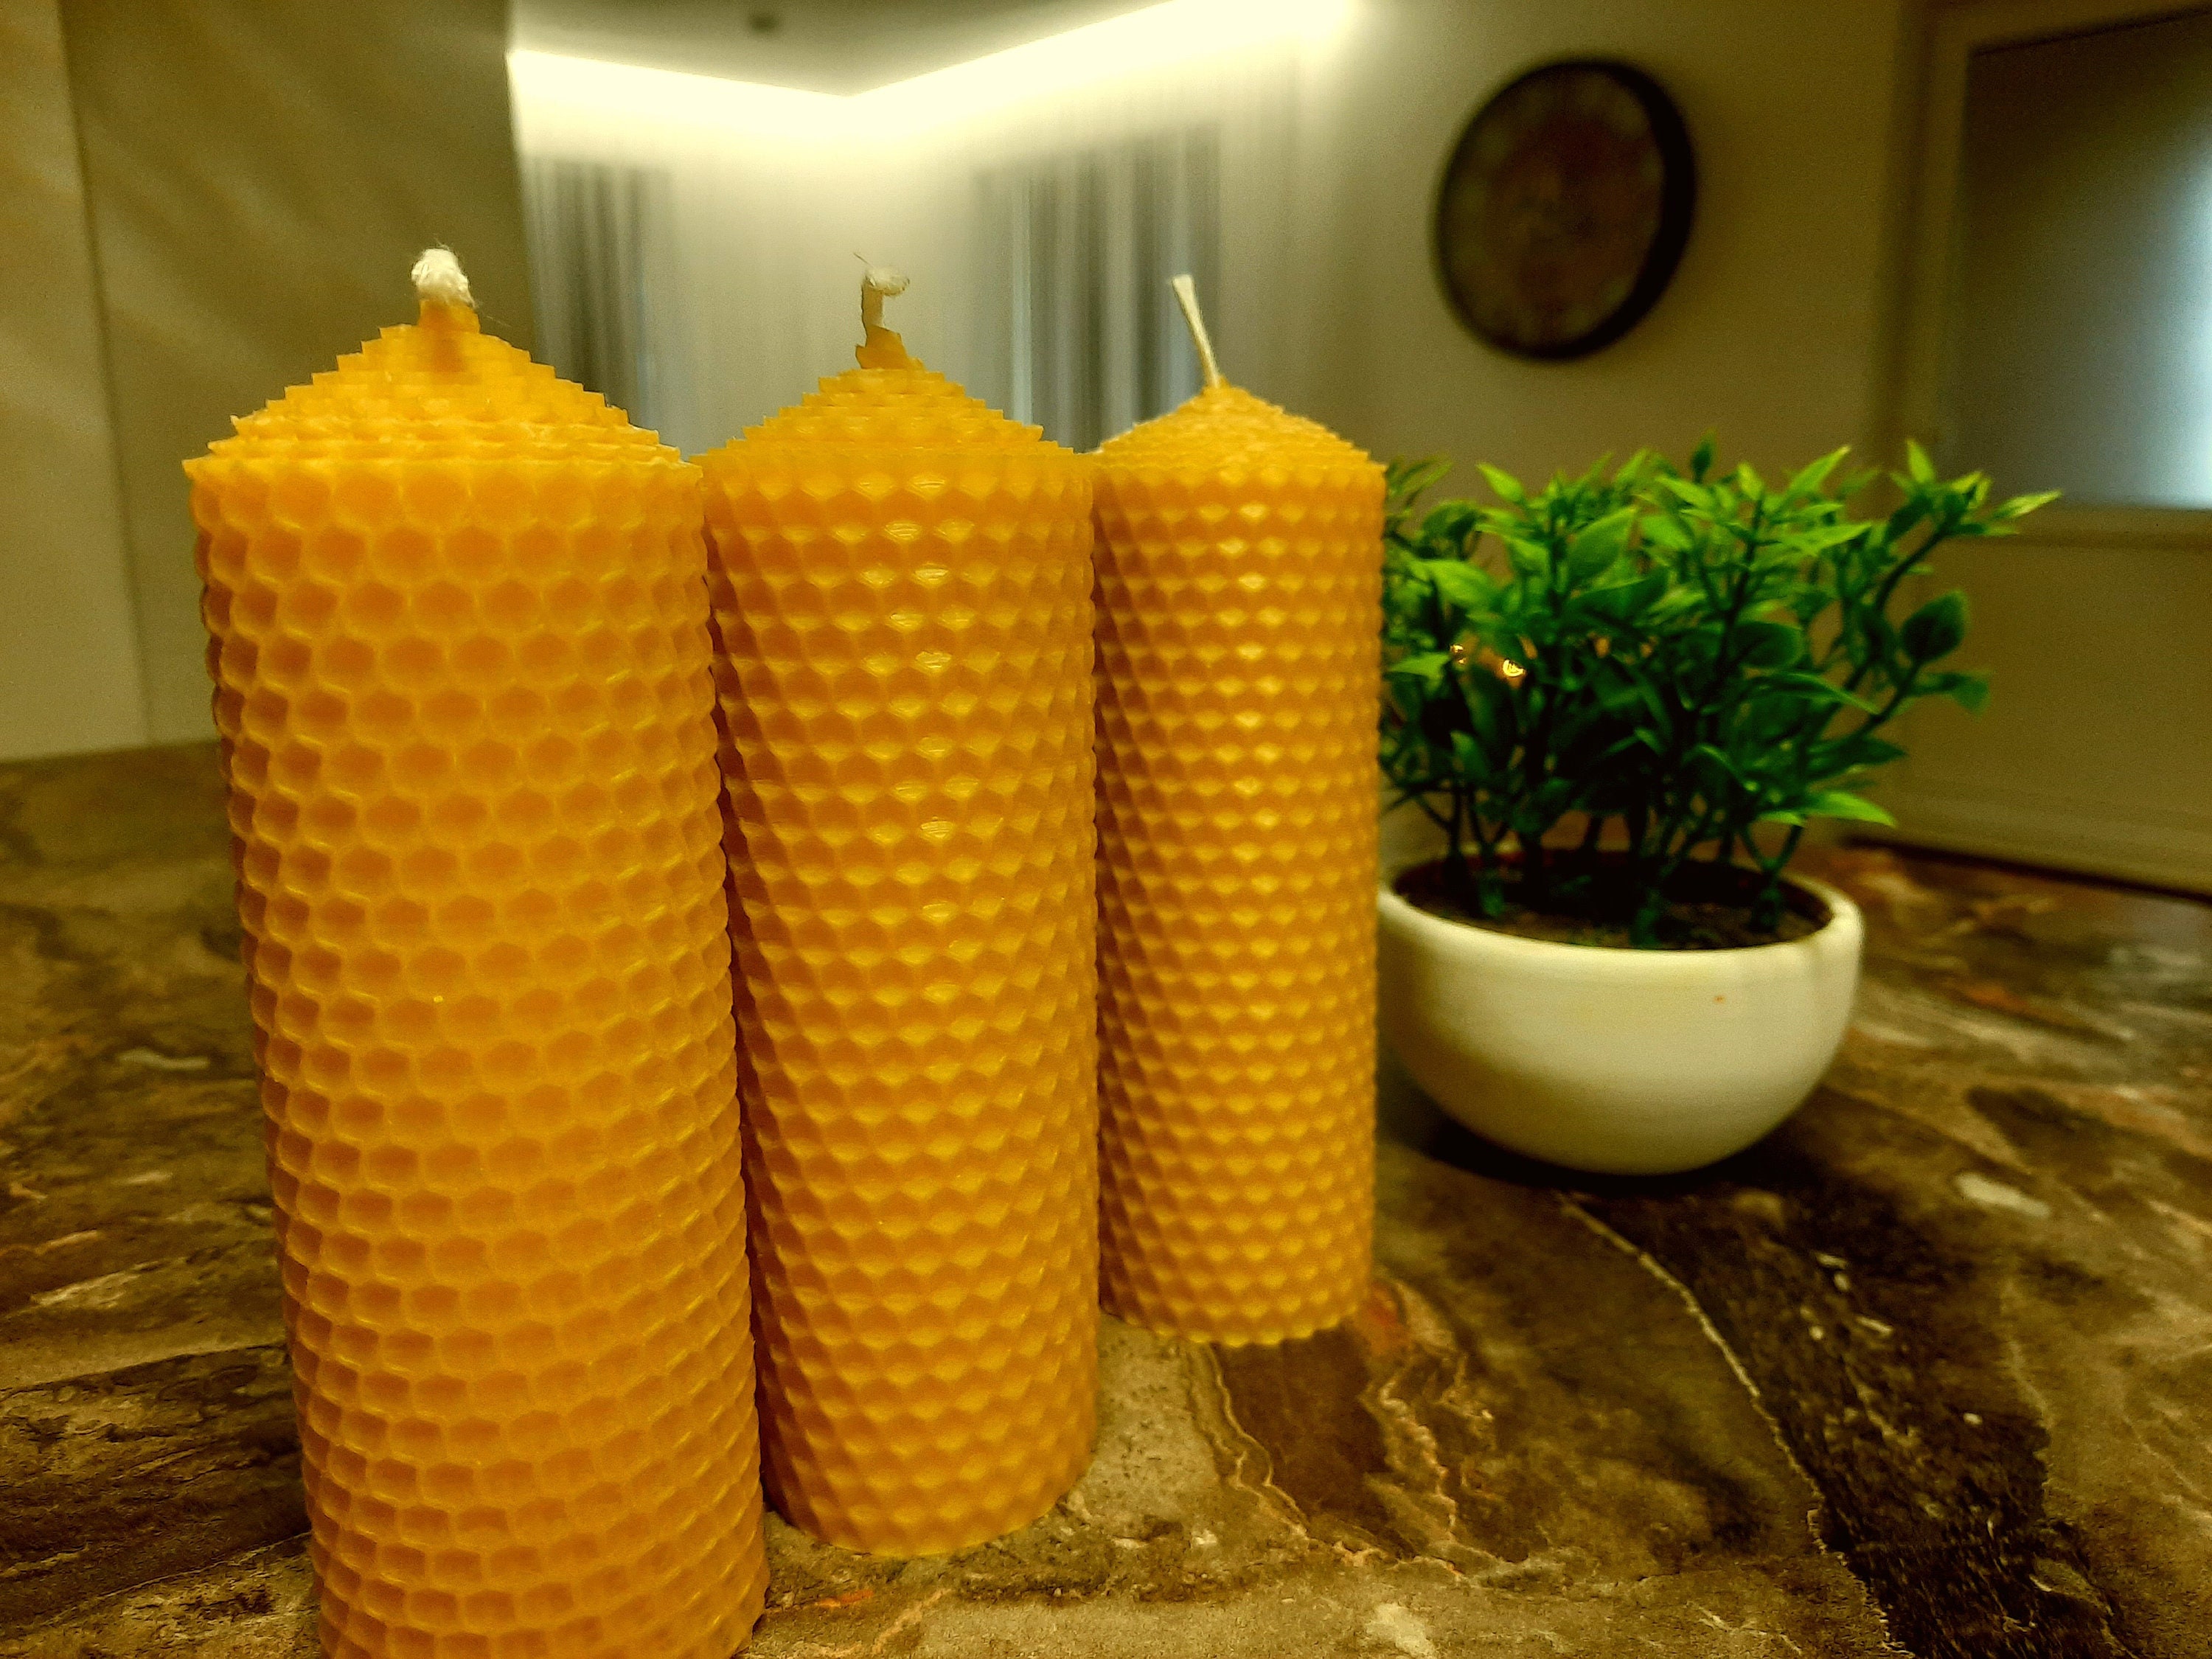 50 Pcs Bulk Beeswax Candles / Pure Beeswax Candles / Wholesale Beeswax  Candles / Bulk Beeswax Pillar Candles / Bulk Massage Beewax Candles 